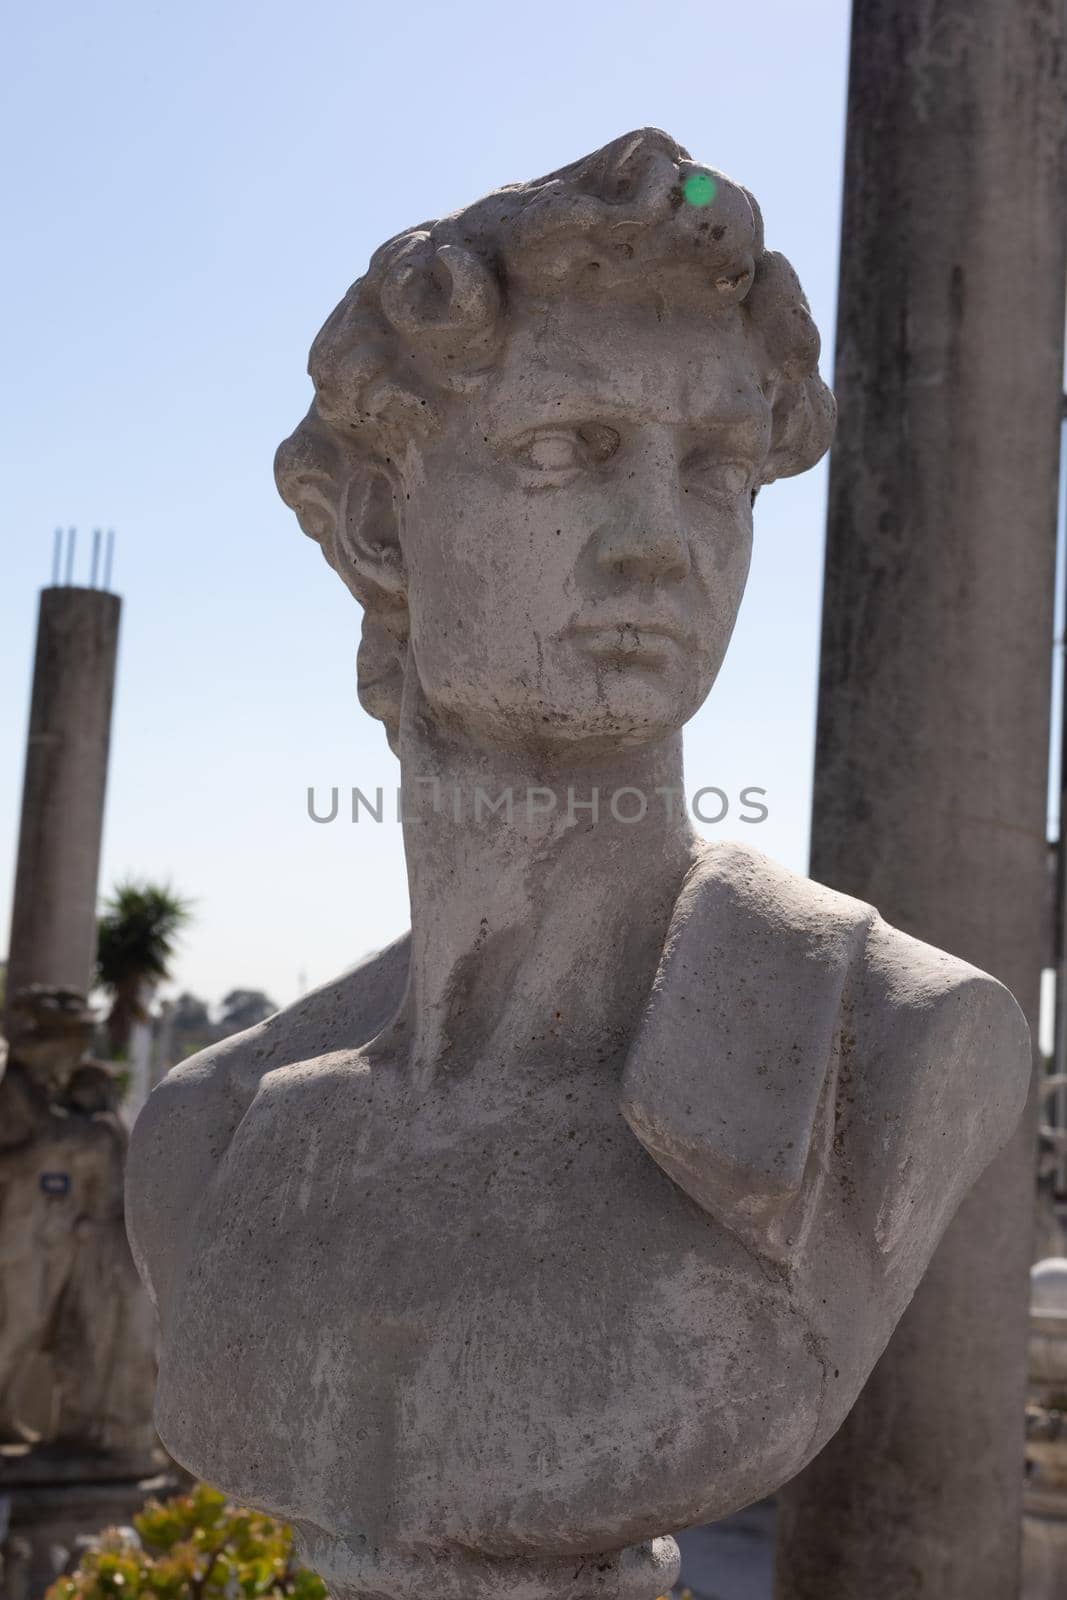 Ancient stone sculpture of man's bust in reclamation yard. art and classical style romantic figurative stone sculpture.